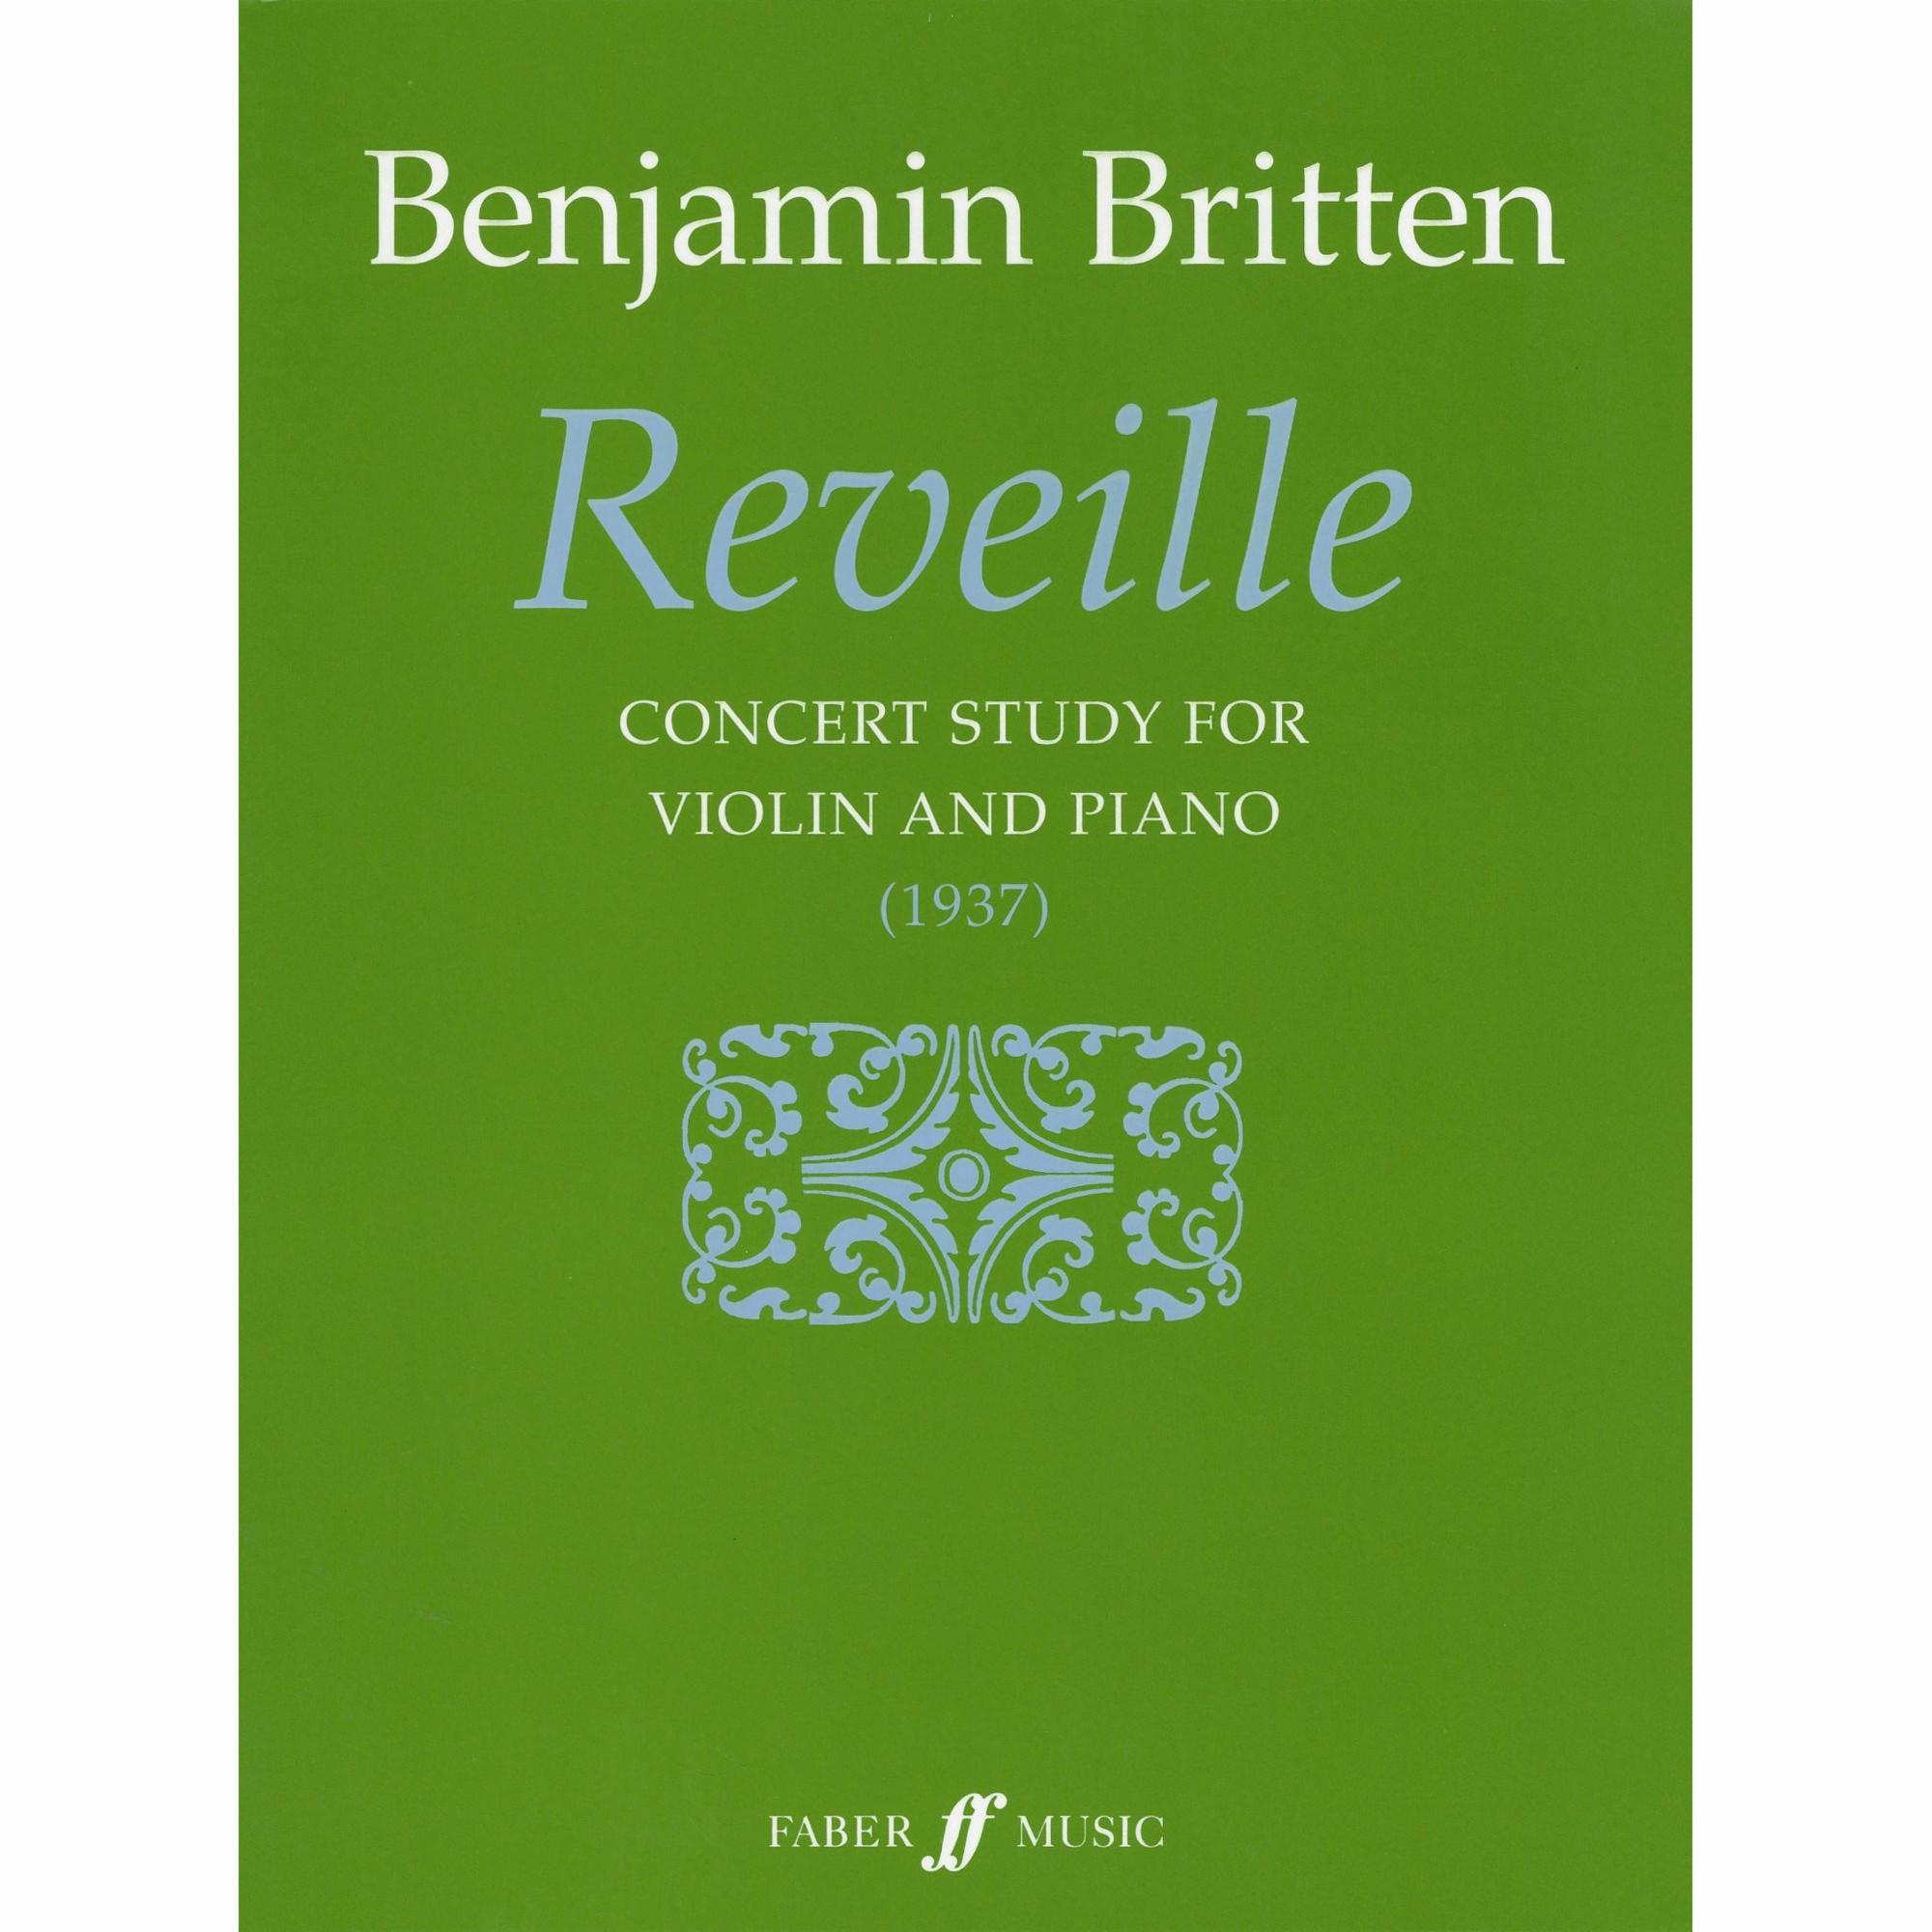 Britten -- Reveille: Concert Study for Violin and Piano